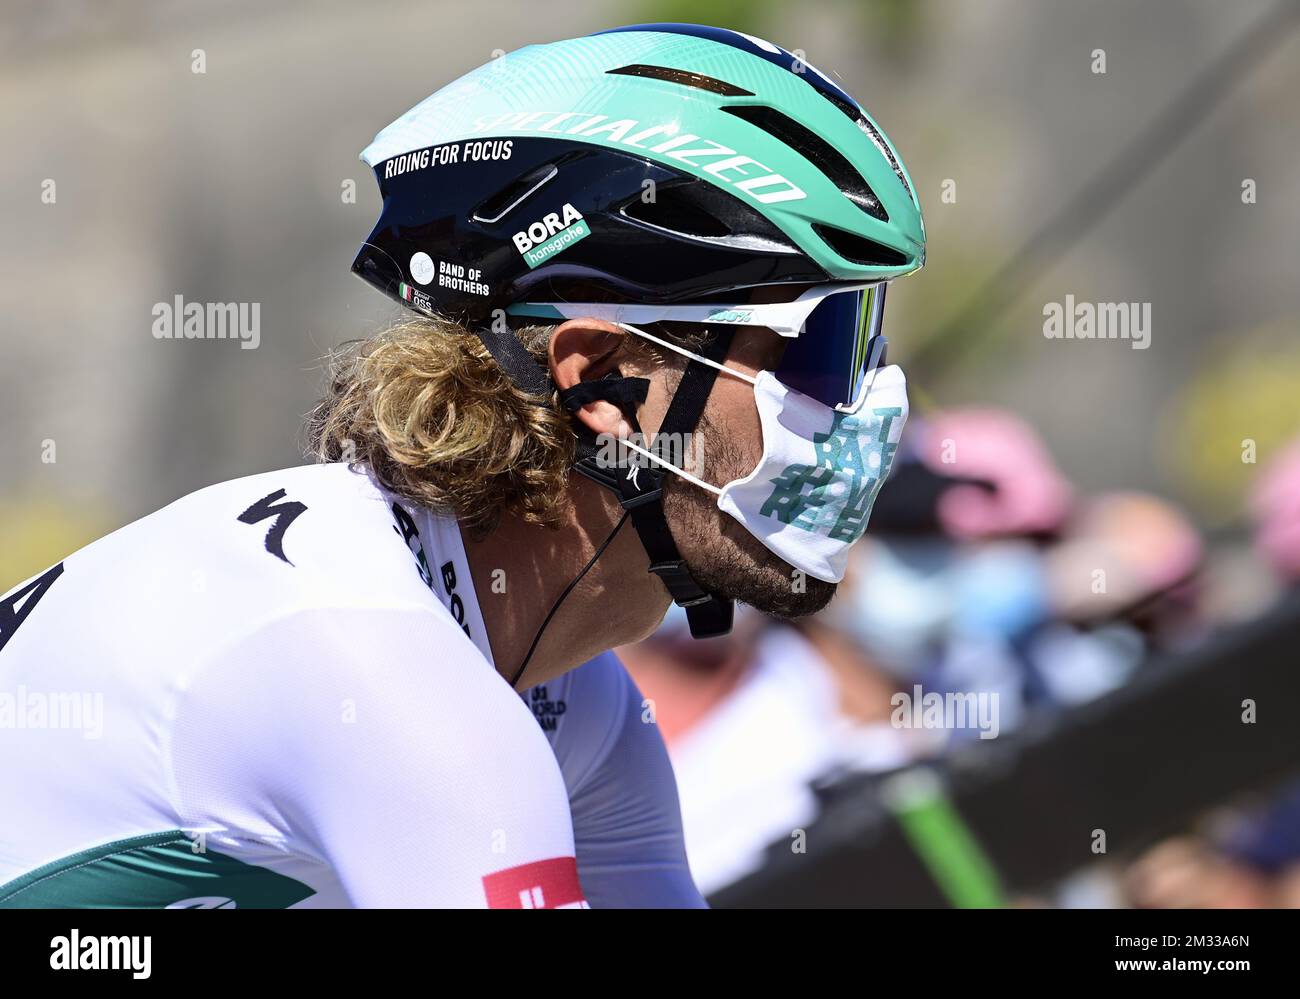 Daniel Oss of Bora - Hansgrohe pictured at the start of the ninth stage of the 107th edition of the Tour de France cycling race from Ile d'Oleron Le Chateau-d'Oleron to Ile de Re Saint-Martin-de-Re (168,5km), in France, Tuesday 08 September 2020. This year's Tour de France was postponed due to the worldwide Covid-19 pandemic. The 2020 race starts in Nice on Saturday 29 August and ends on 20 September. BELGA PHOTO POOL PETER DE VOECHT Stock Photo